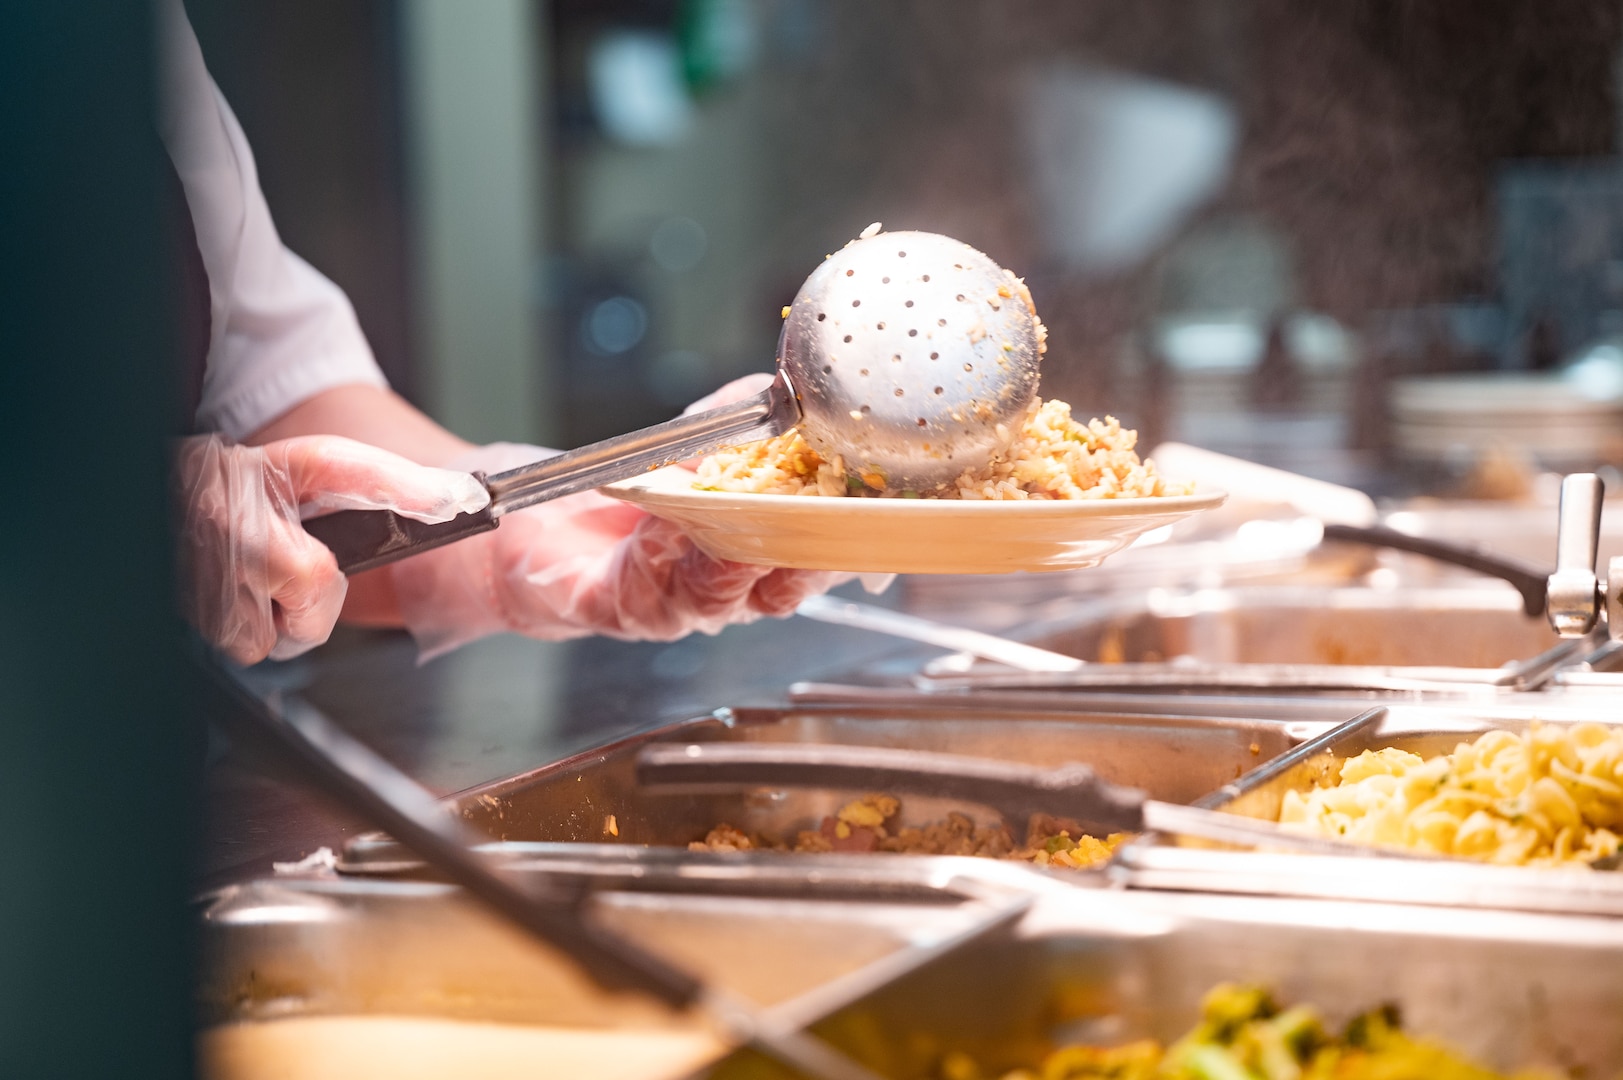 Server scoops food onto plate in the dining facility